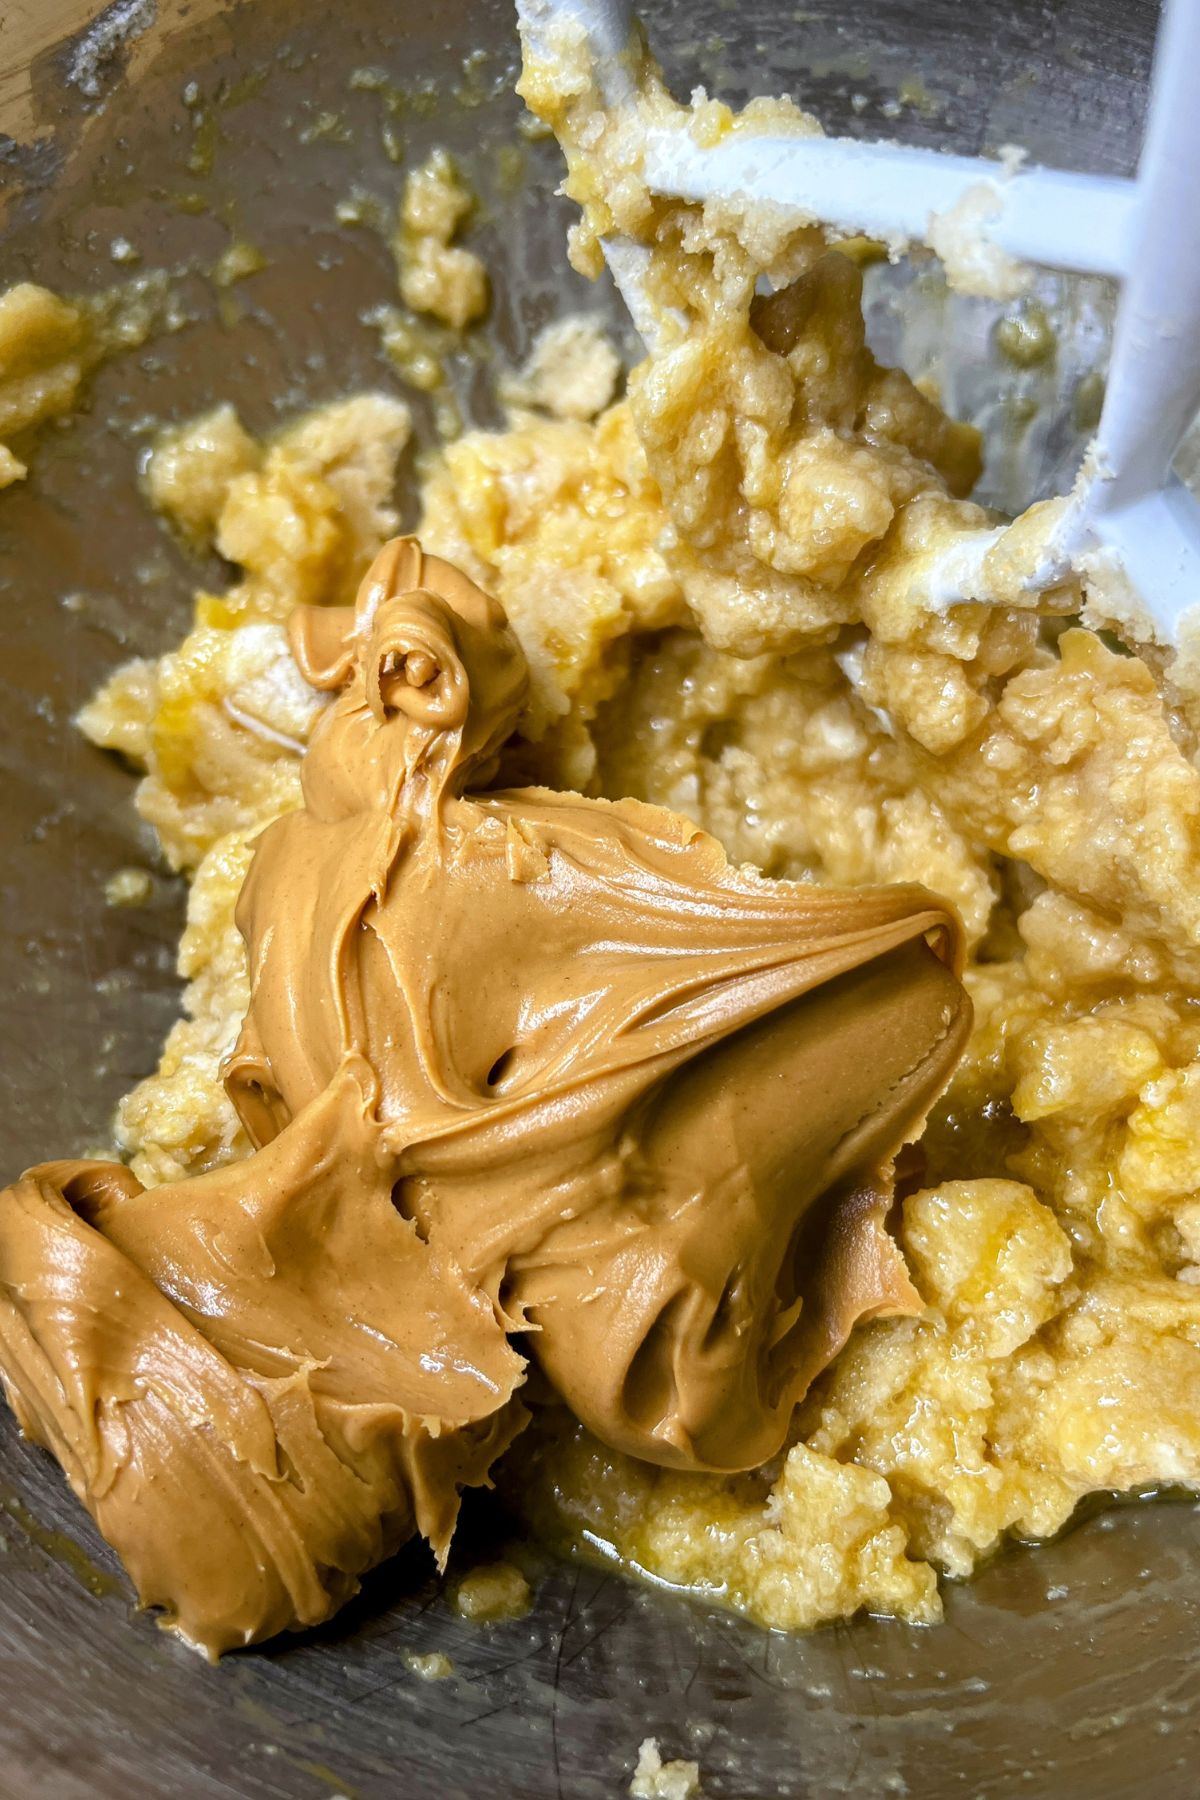 Peanut butter and eggs in a bowl with cookie dough.